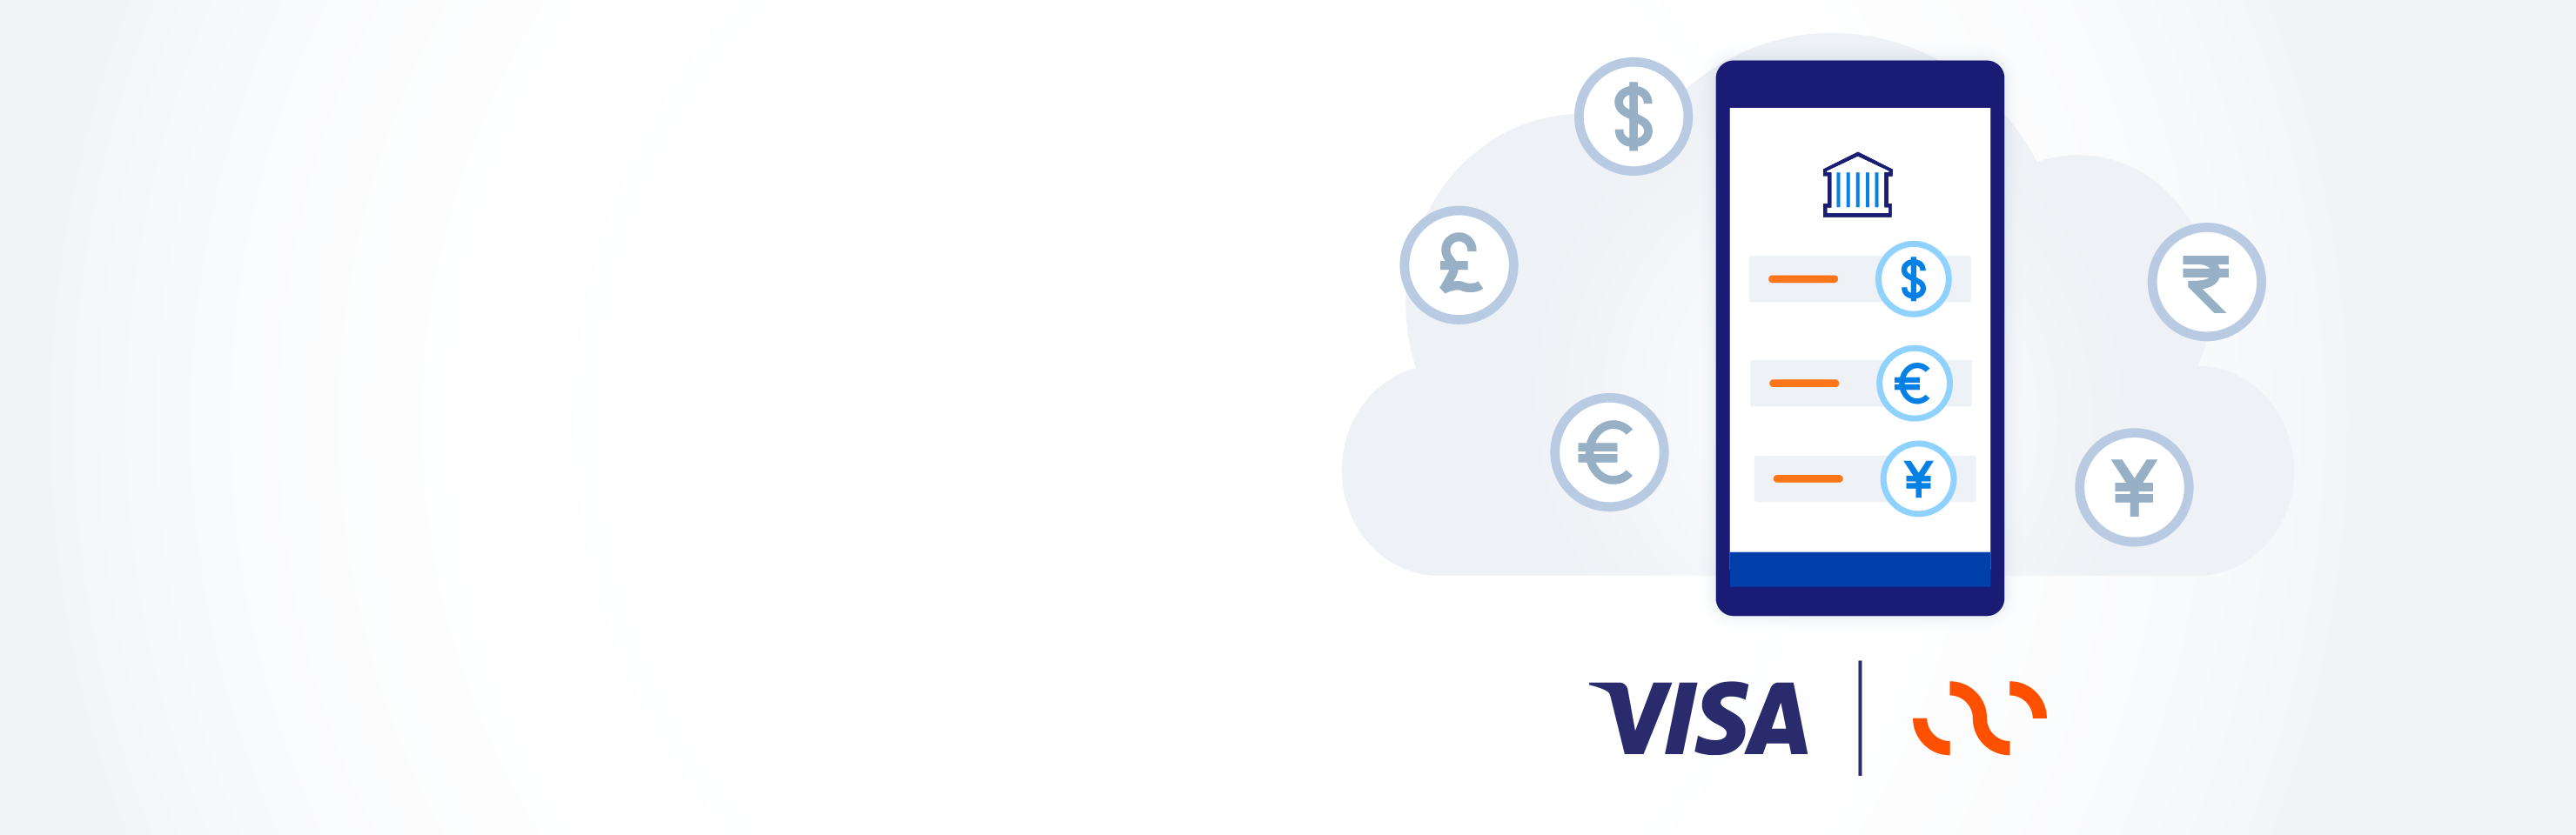 Image of Mobile Phone with FX Payments above Visa + CurrencyCloud